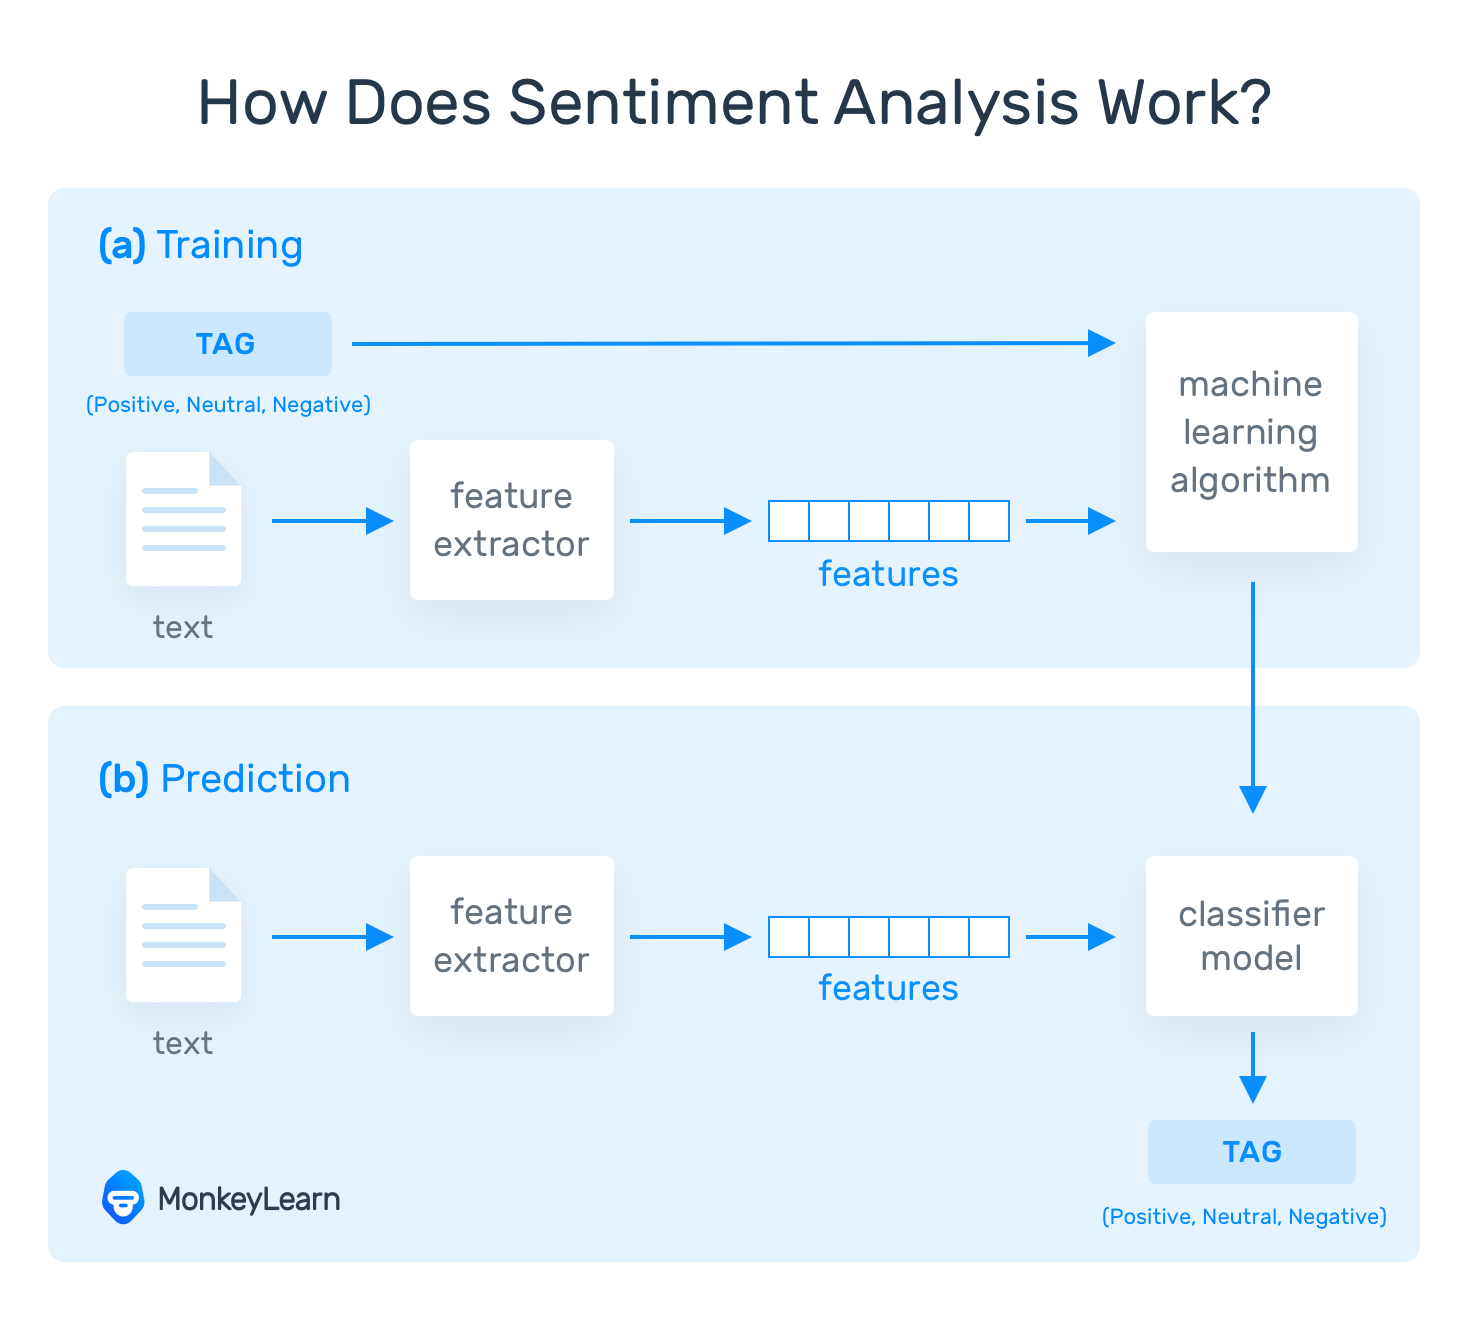 How does Sentiment Analysis Work